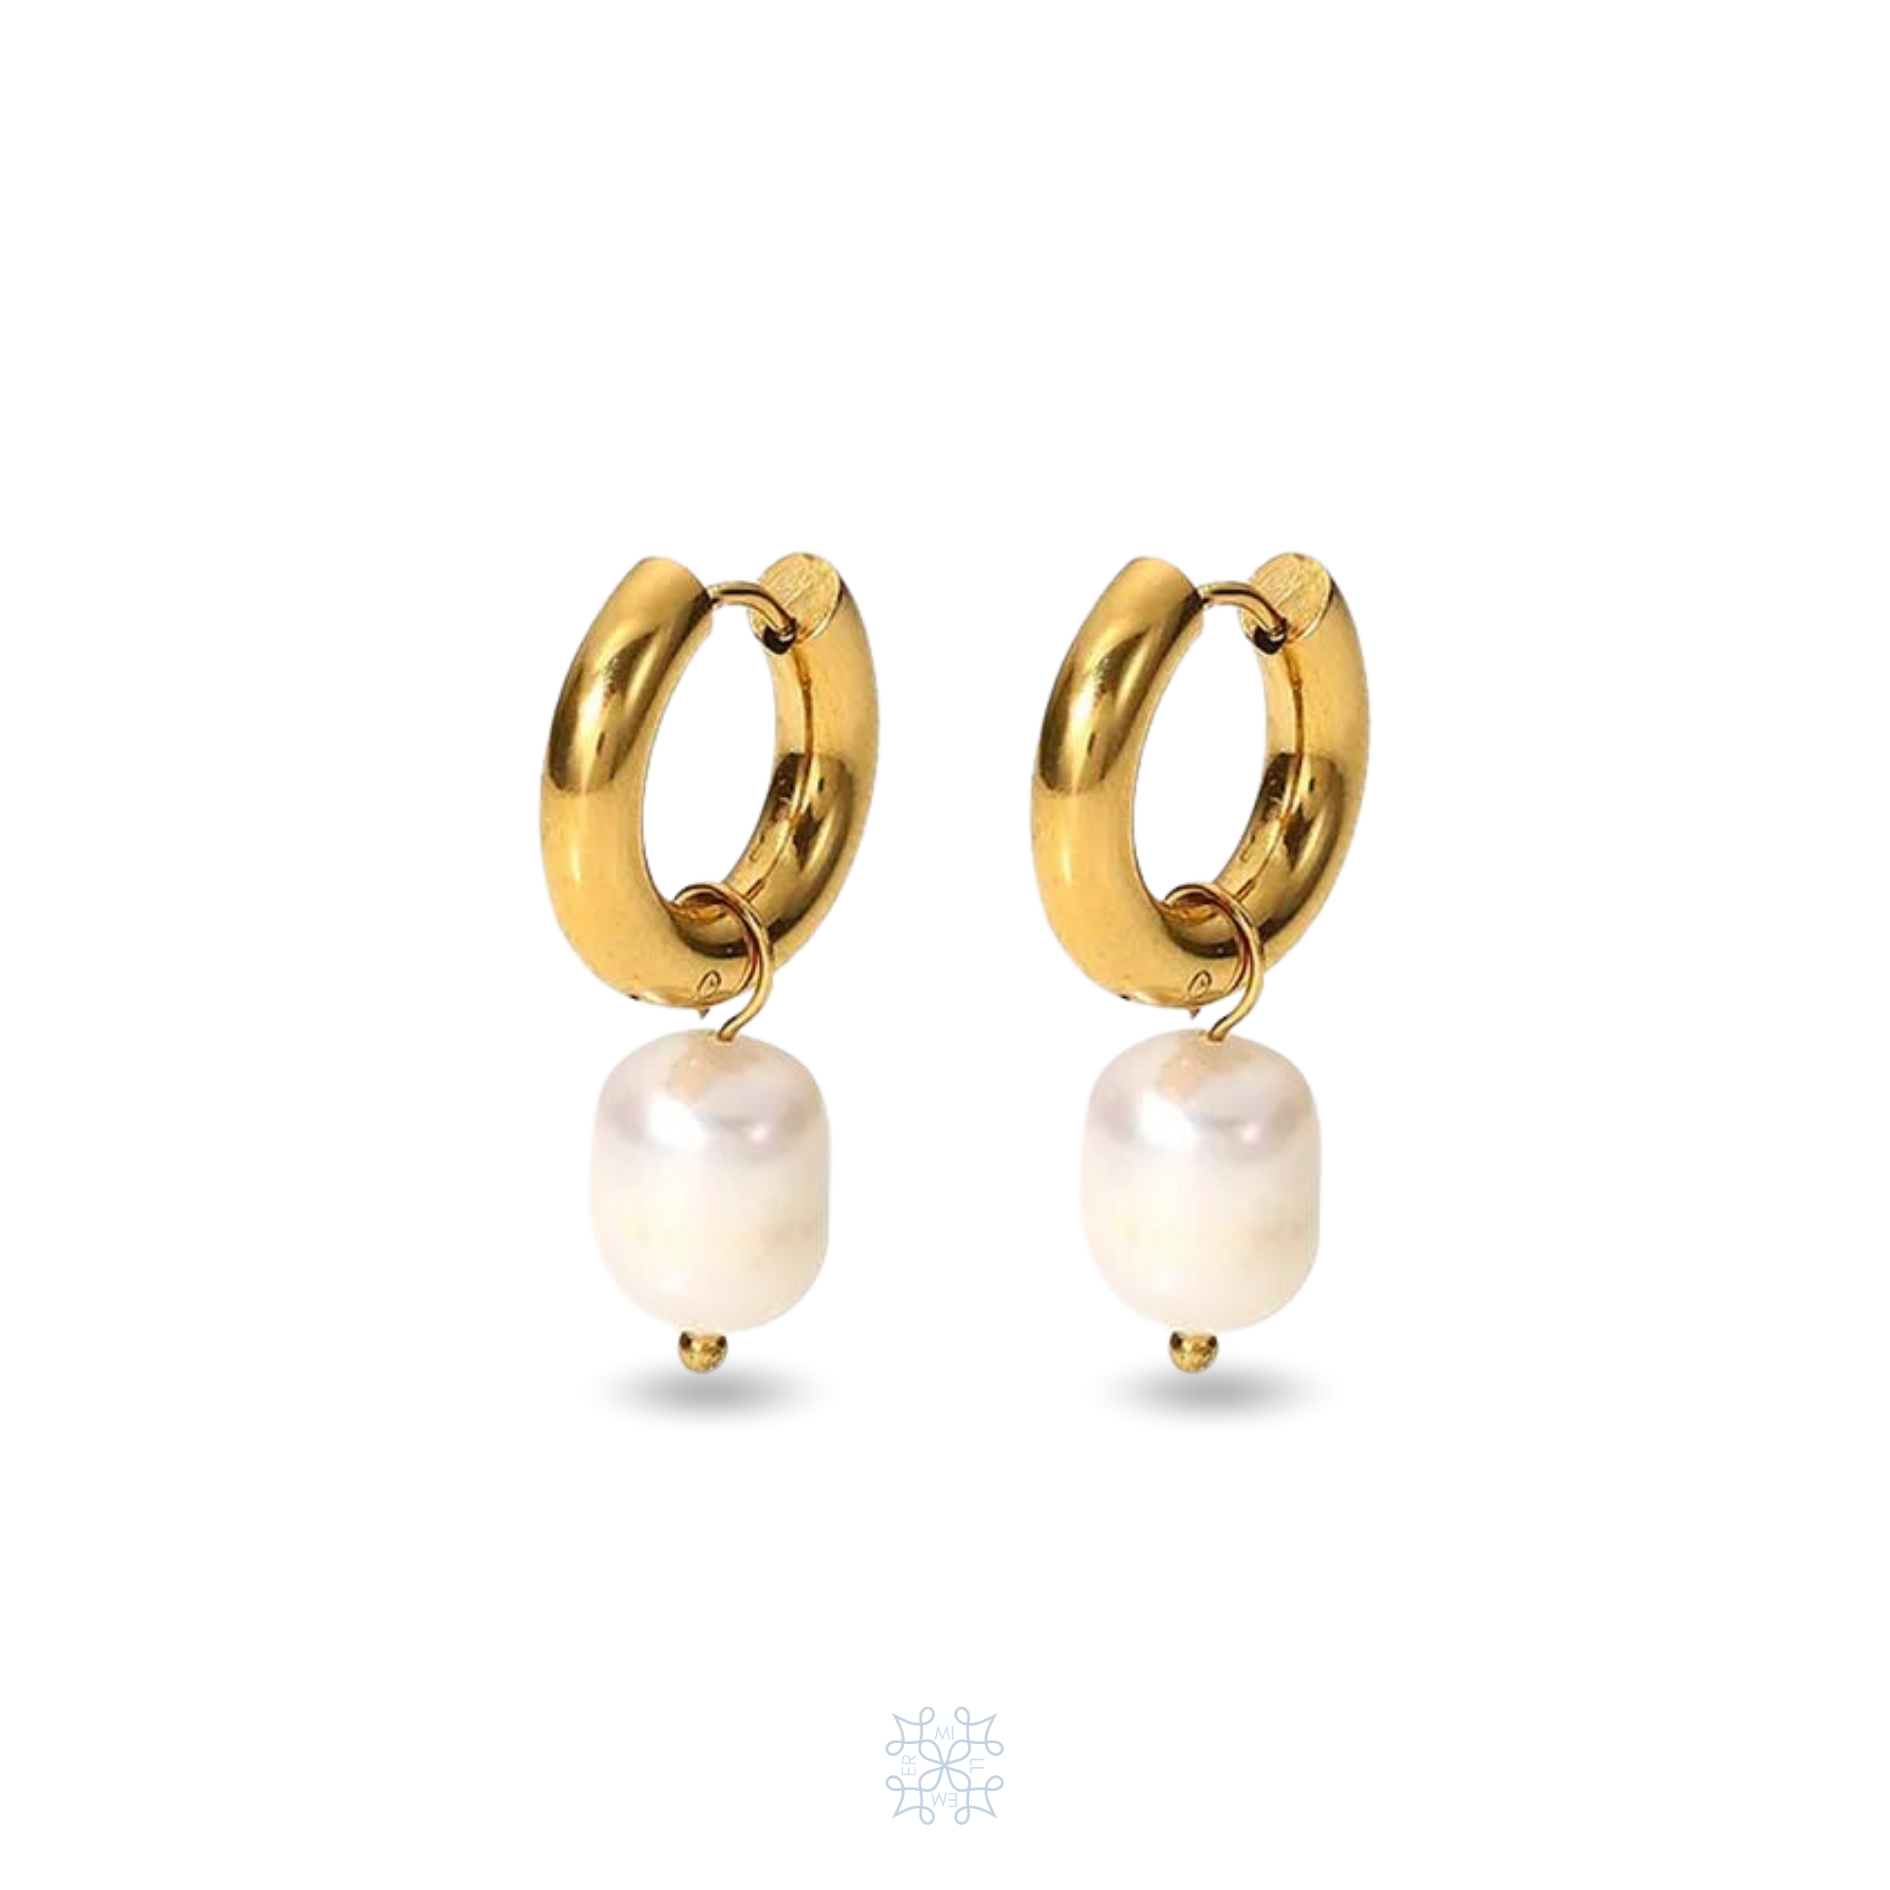 GOLD plated pearl earrings. round gold hoops with detachable pearl drop.